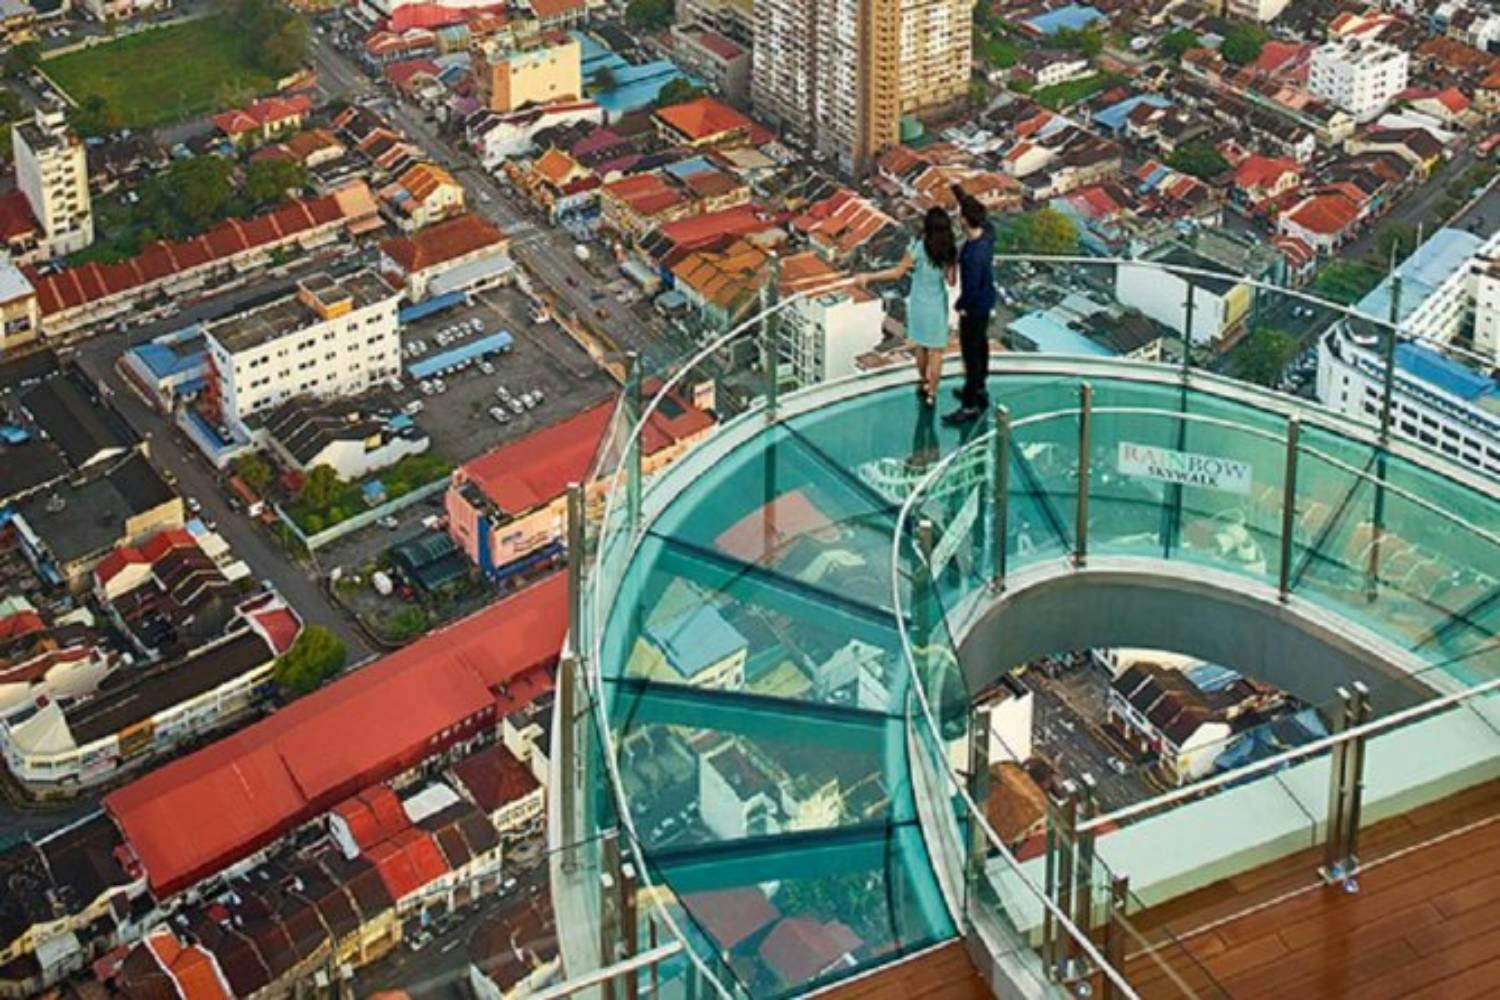 Penang Rainbow Skywalk and the top Komtar Observation Deck tickets